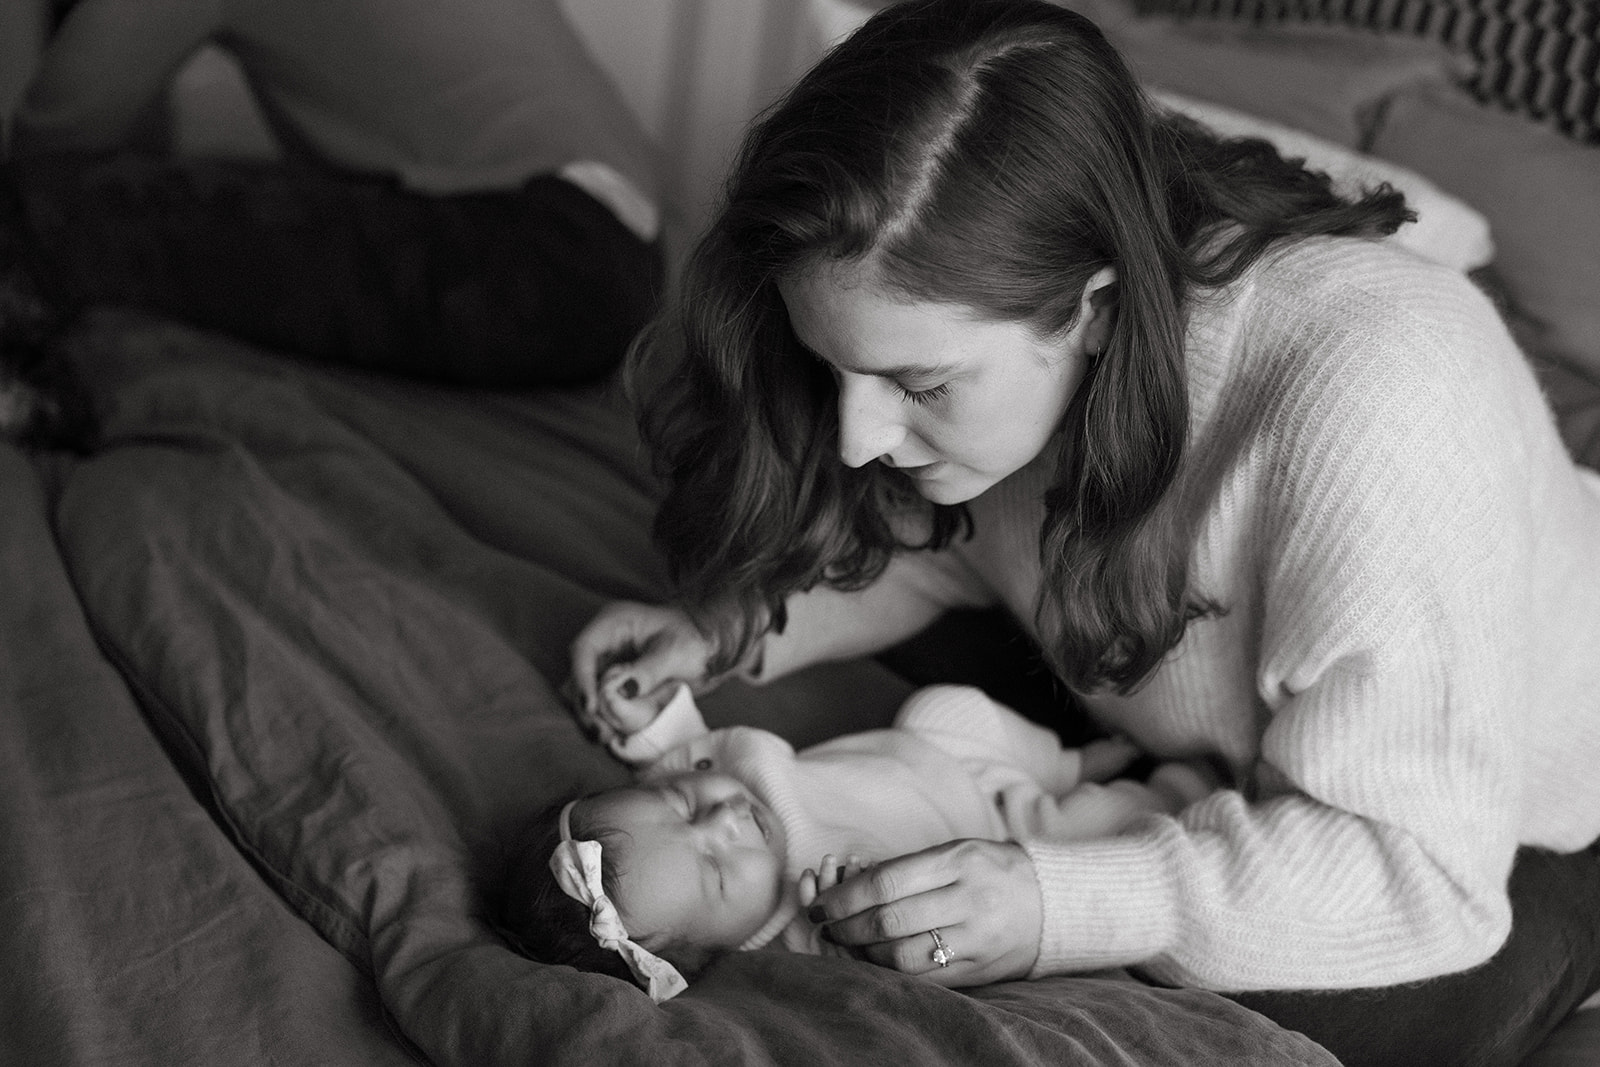 In-home newborn photoshoot with baby girl in San Francisco Noe Valley.